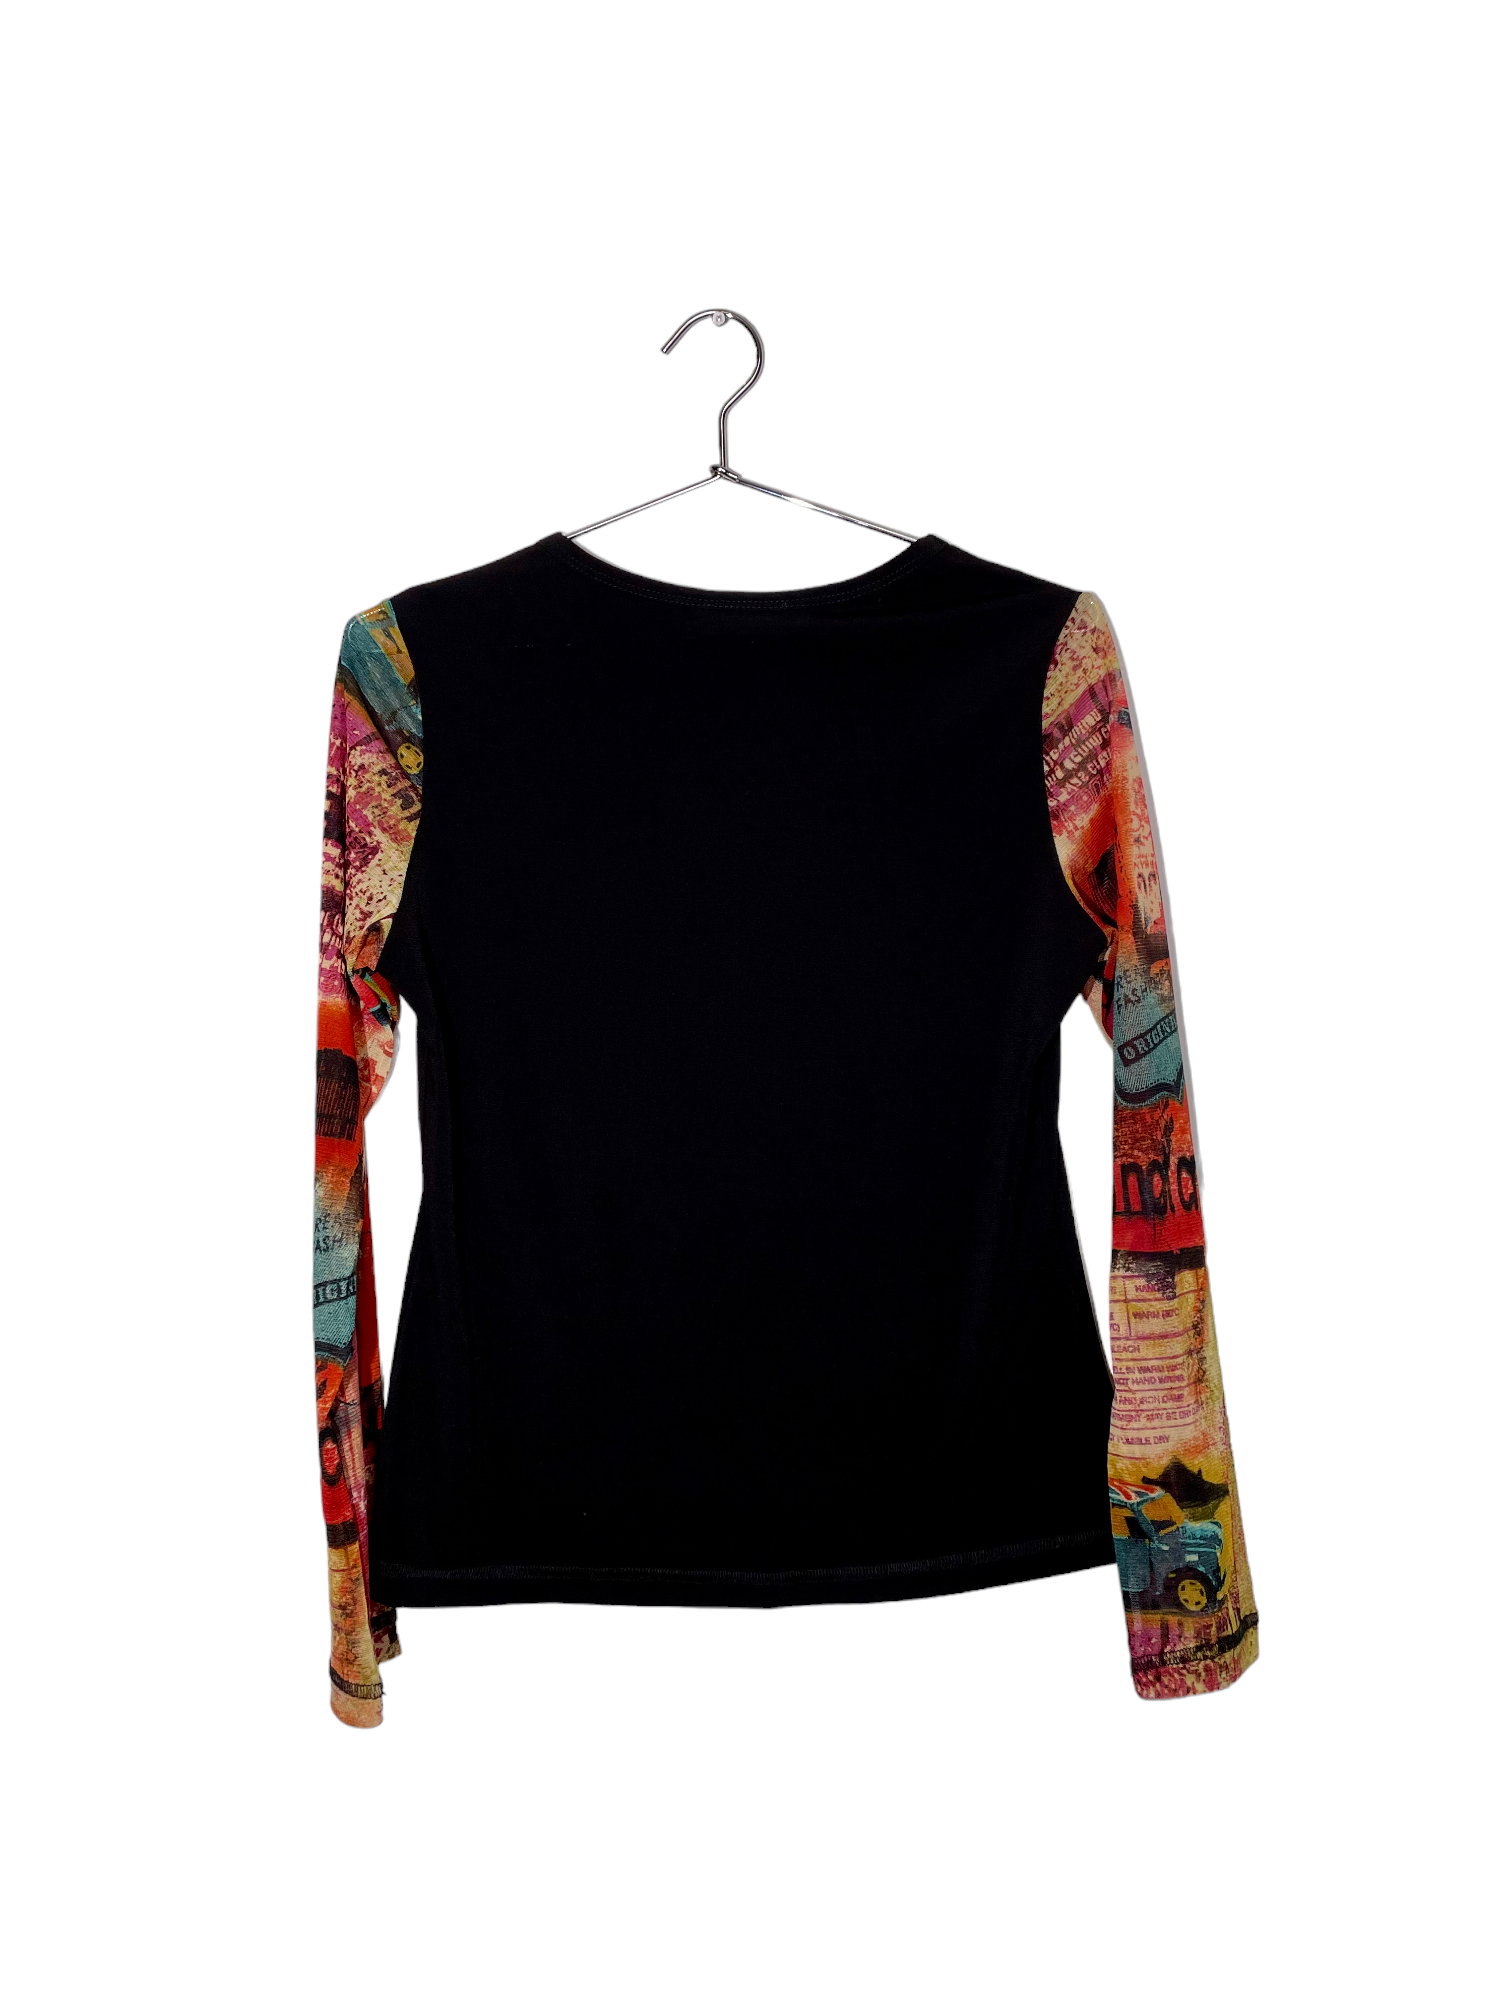 Multicolored Graphic Long Sleeve Top